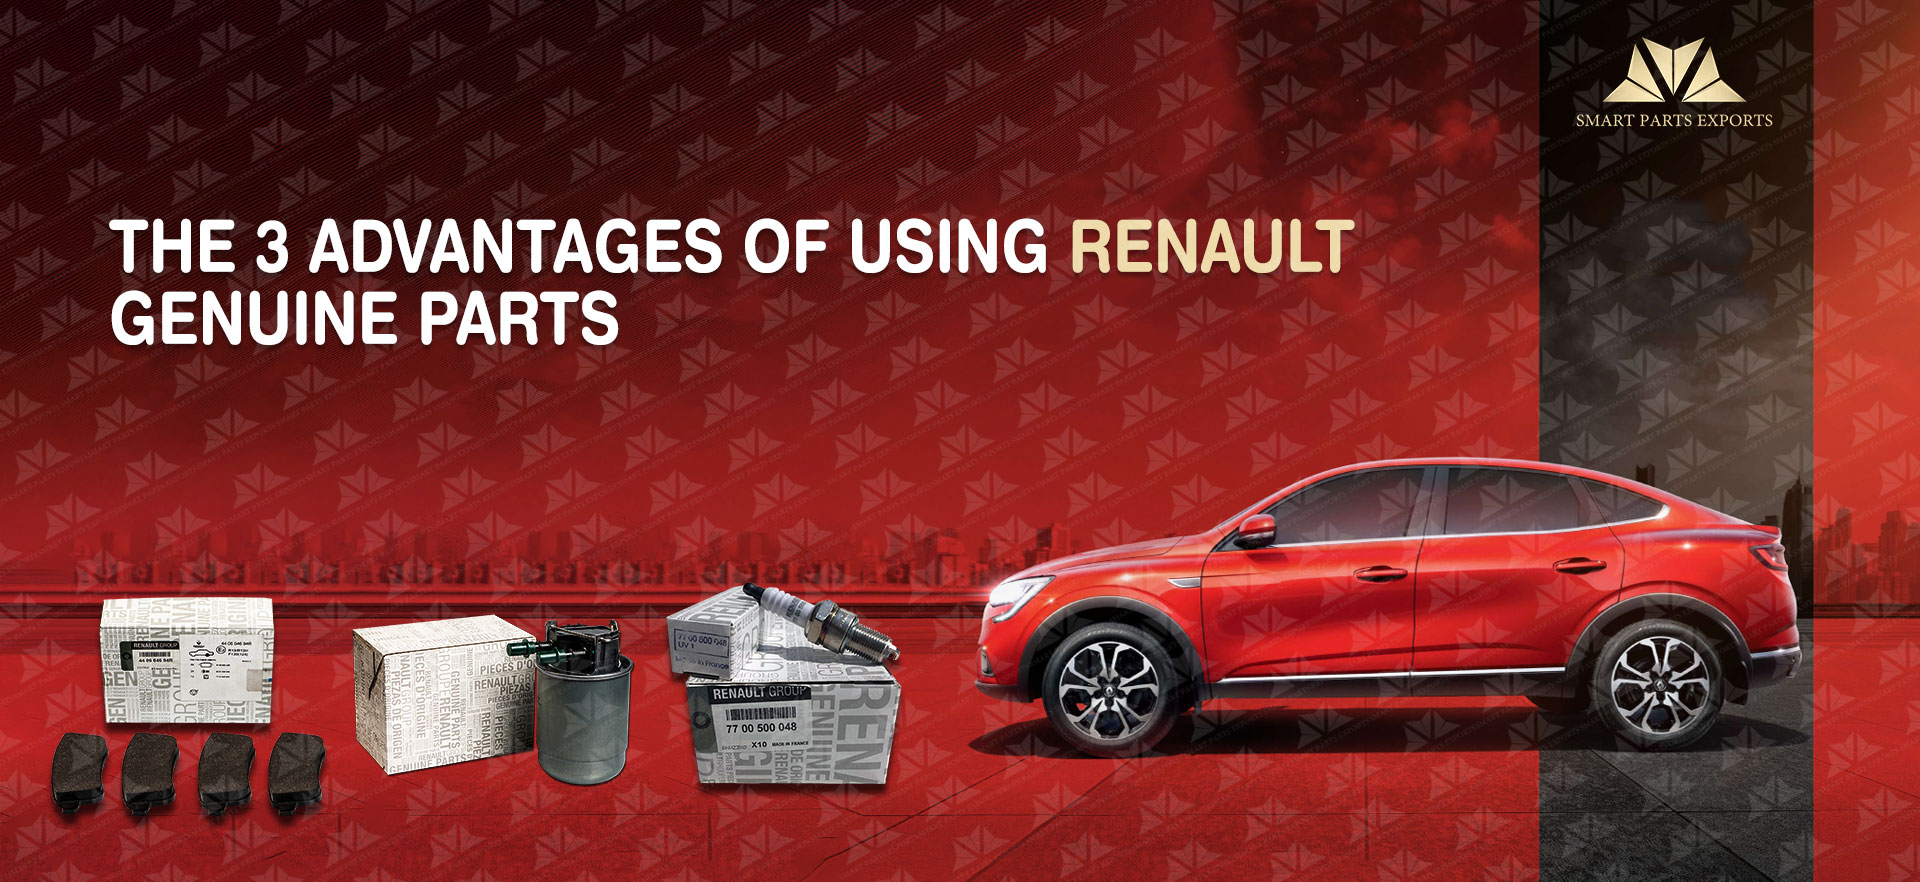 The 3 Advantages of Using Renault Genuine Parts